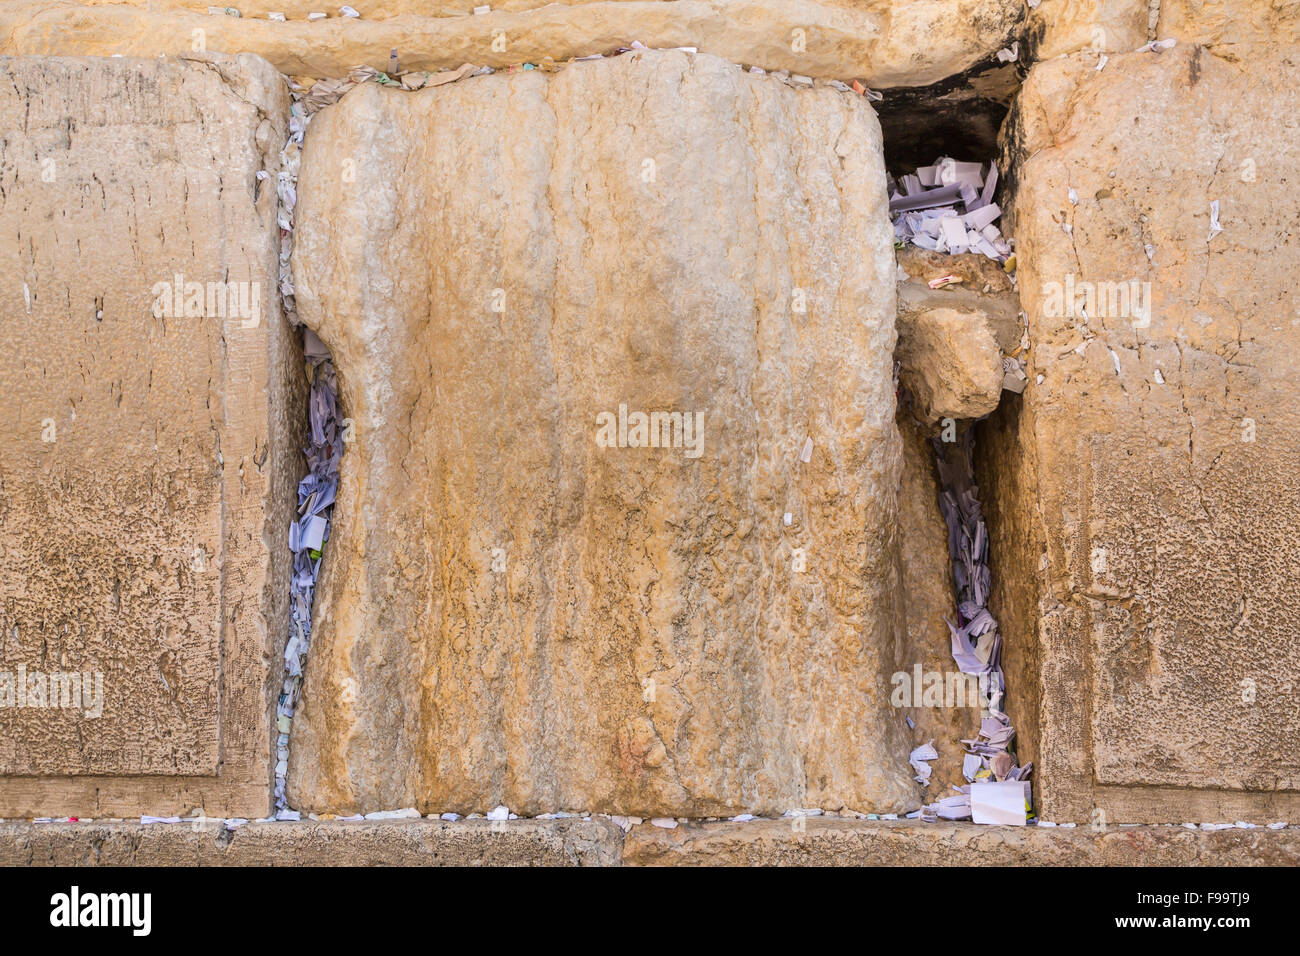 Prayers written on paper stuck into cracks in the Western Wall in Jerusalem, Israel, Middle East. Stock Photo